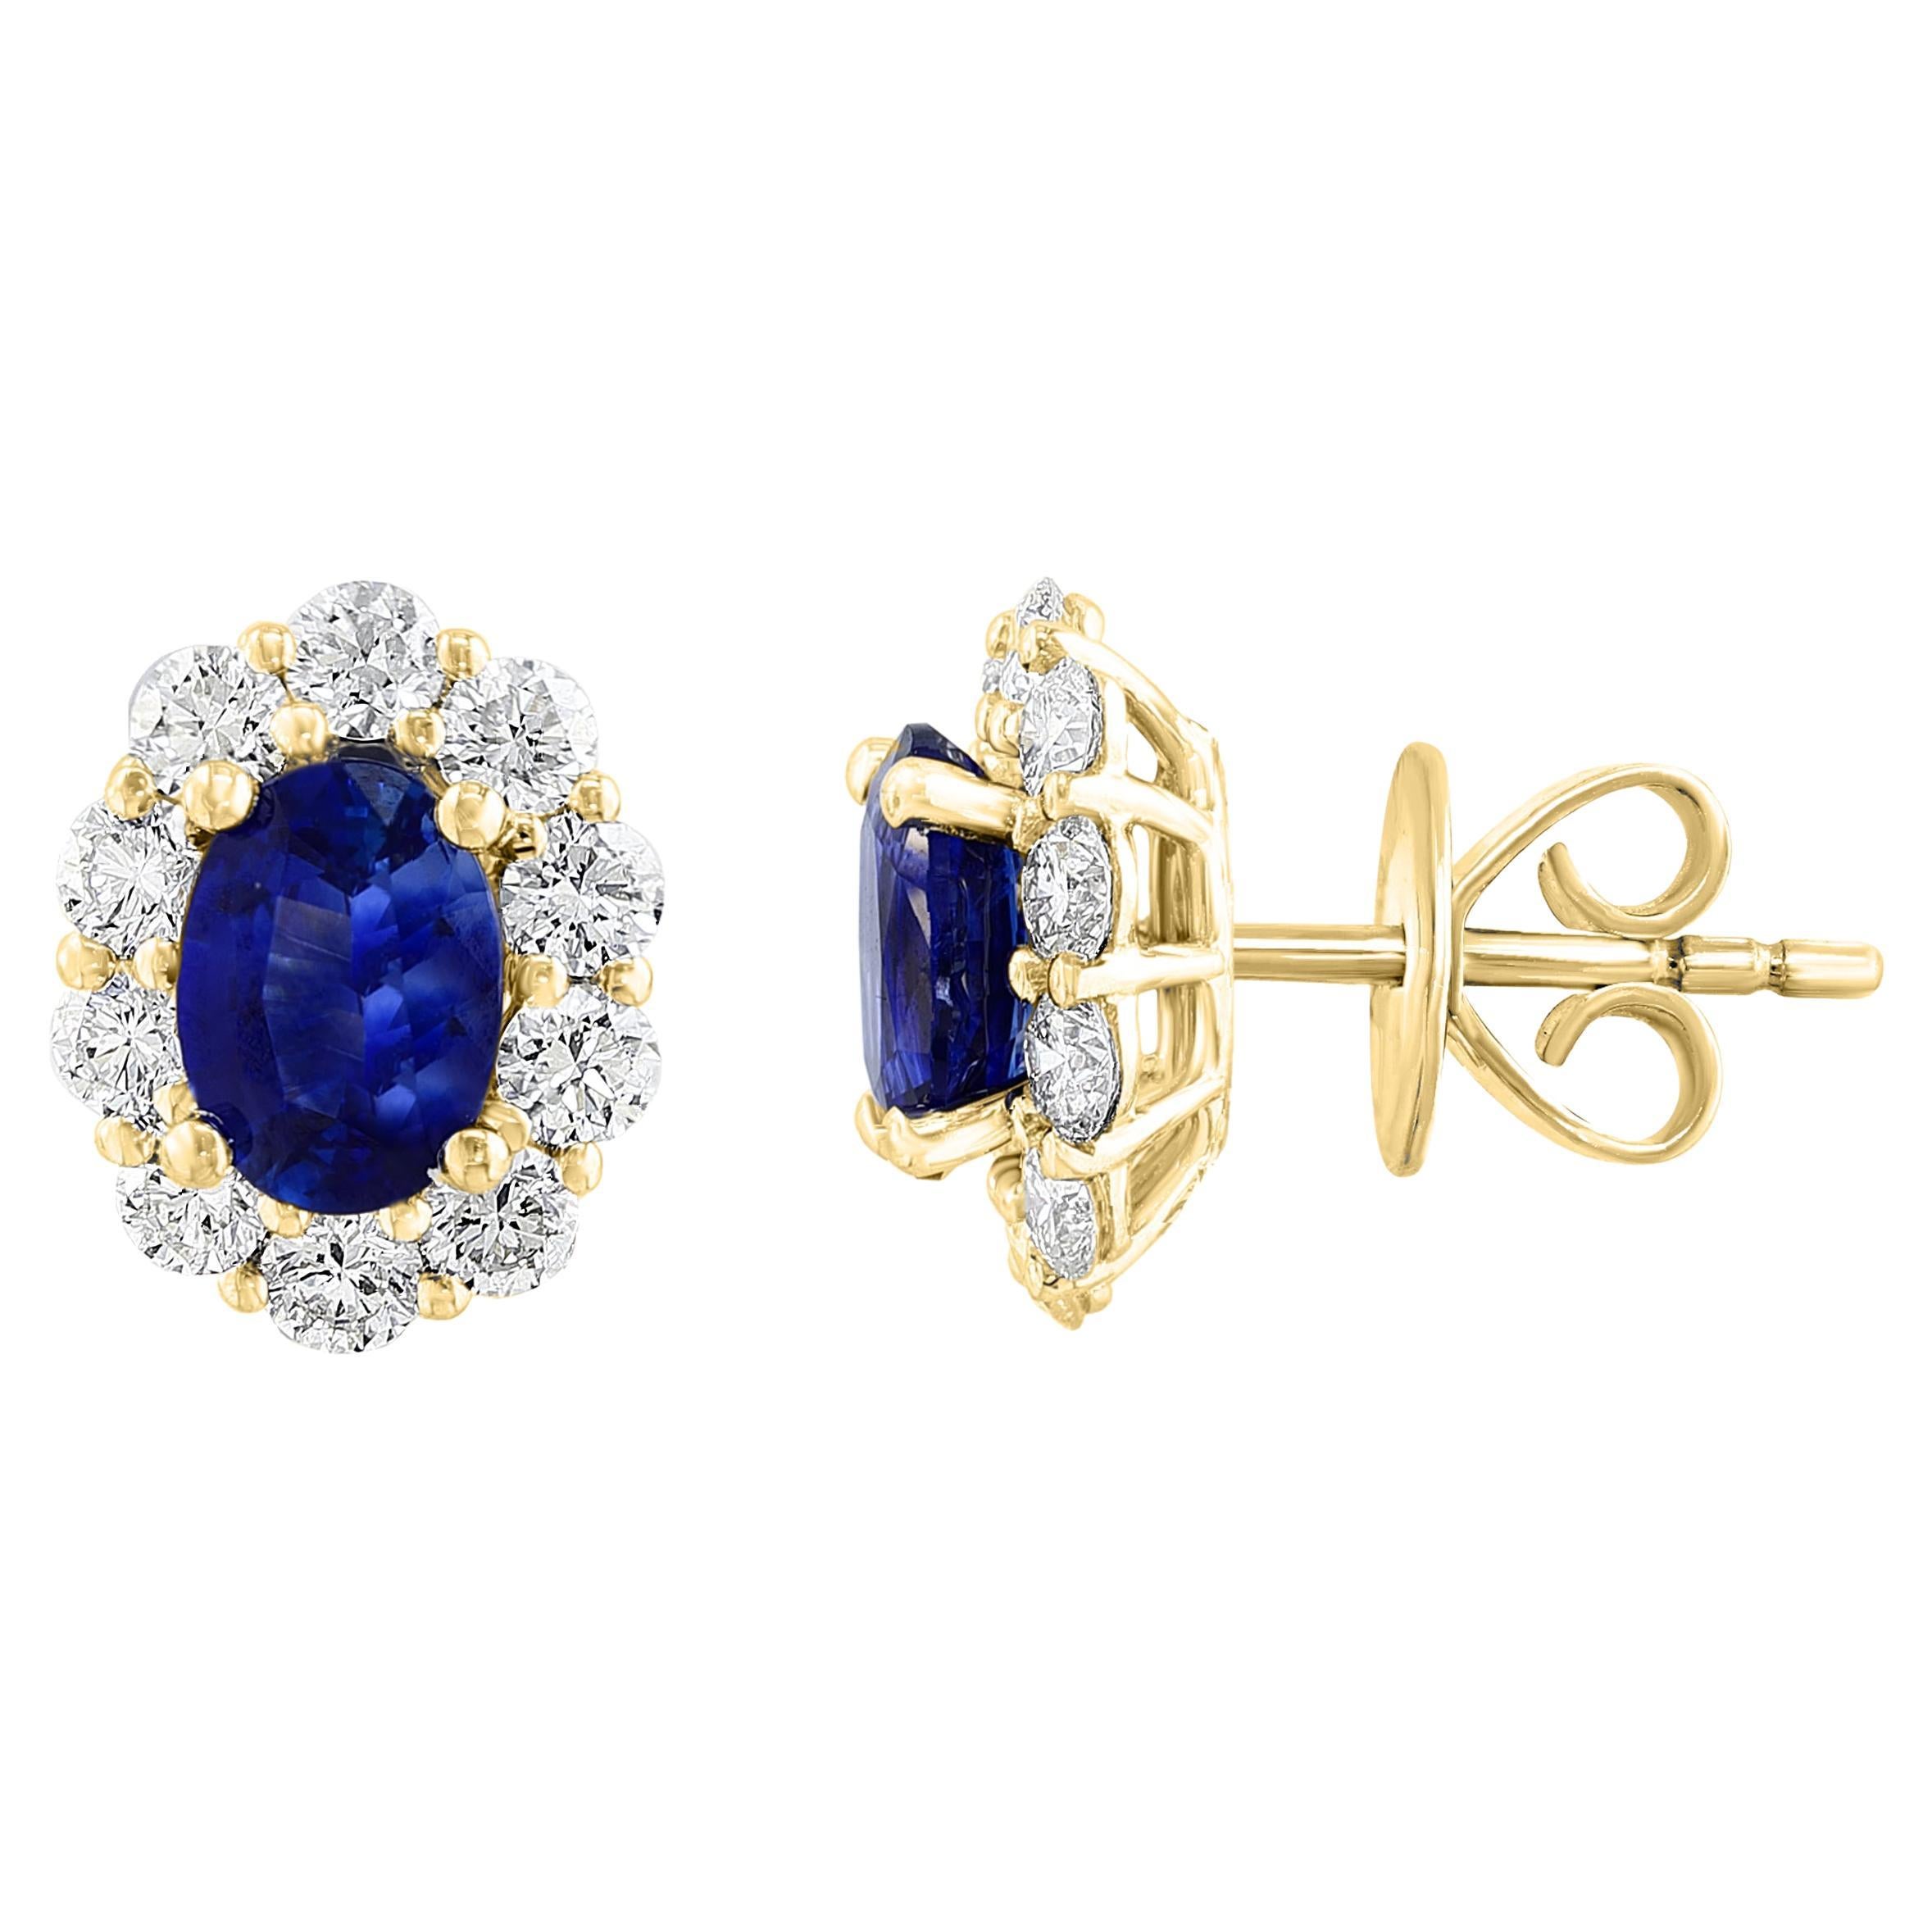 1.60 Carat Oval Cut Sapphire and Diamond Stud Earrings in 18K Yellow Gold For Sale